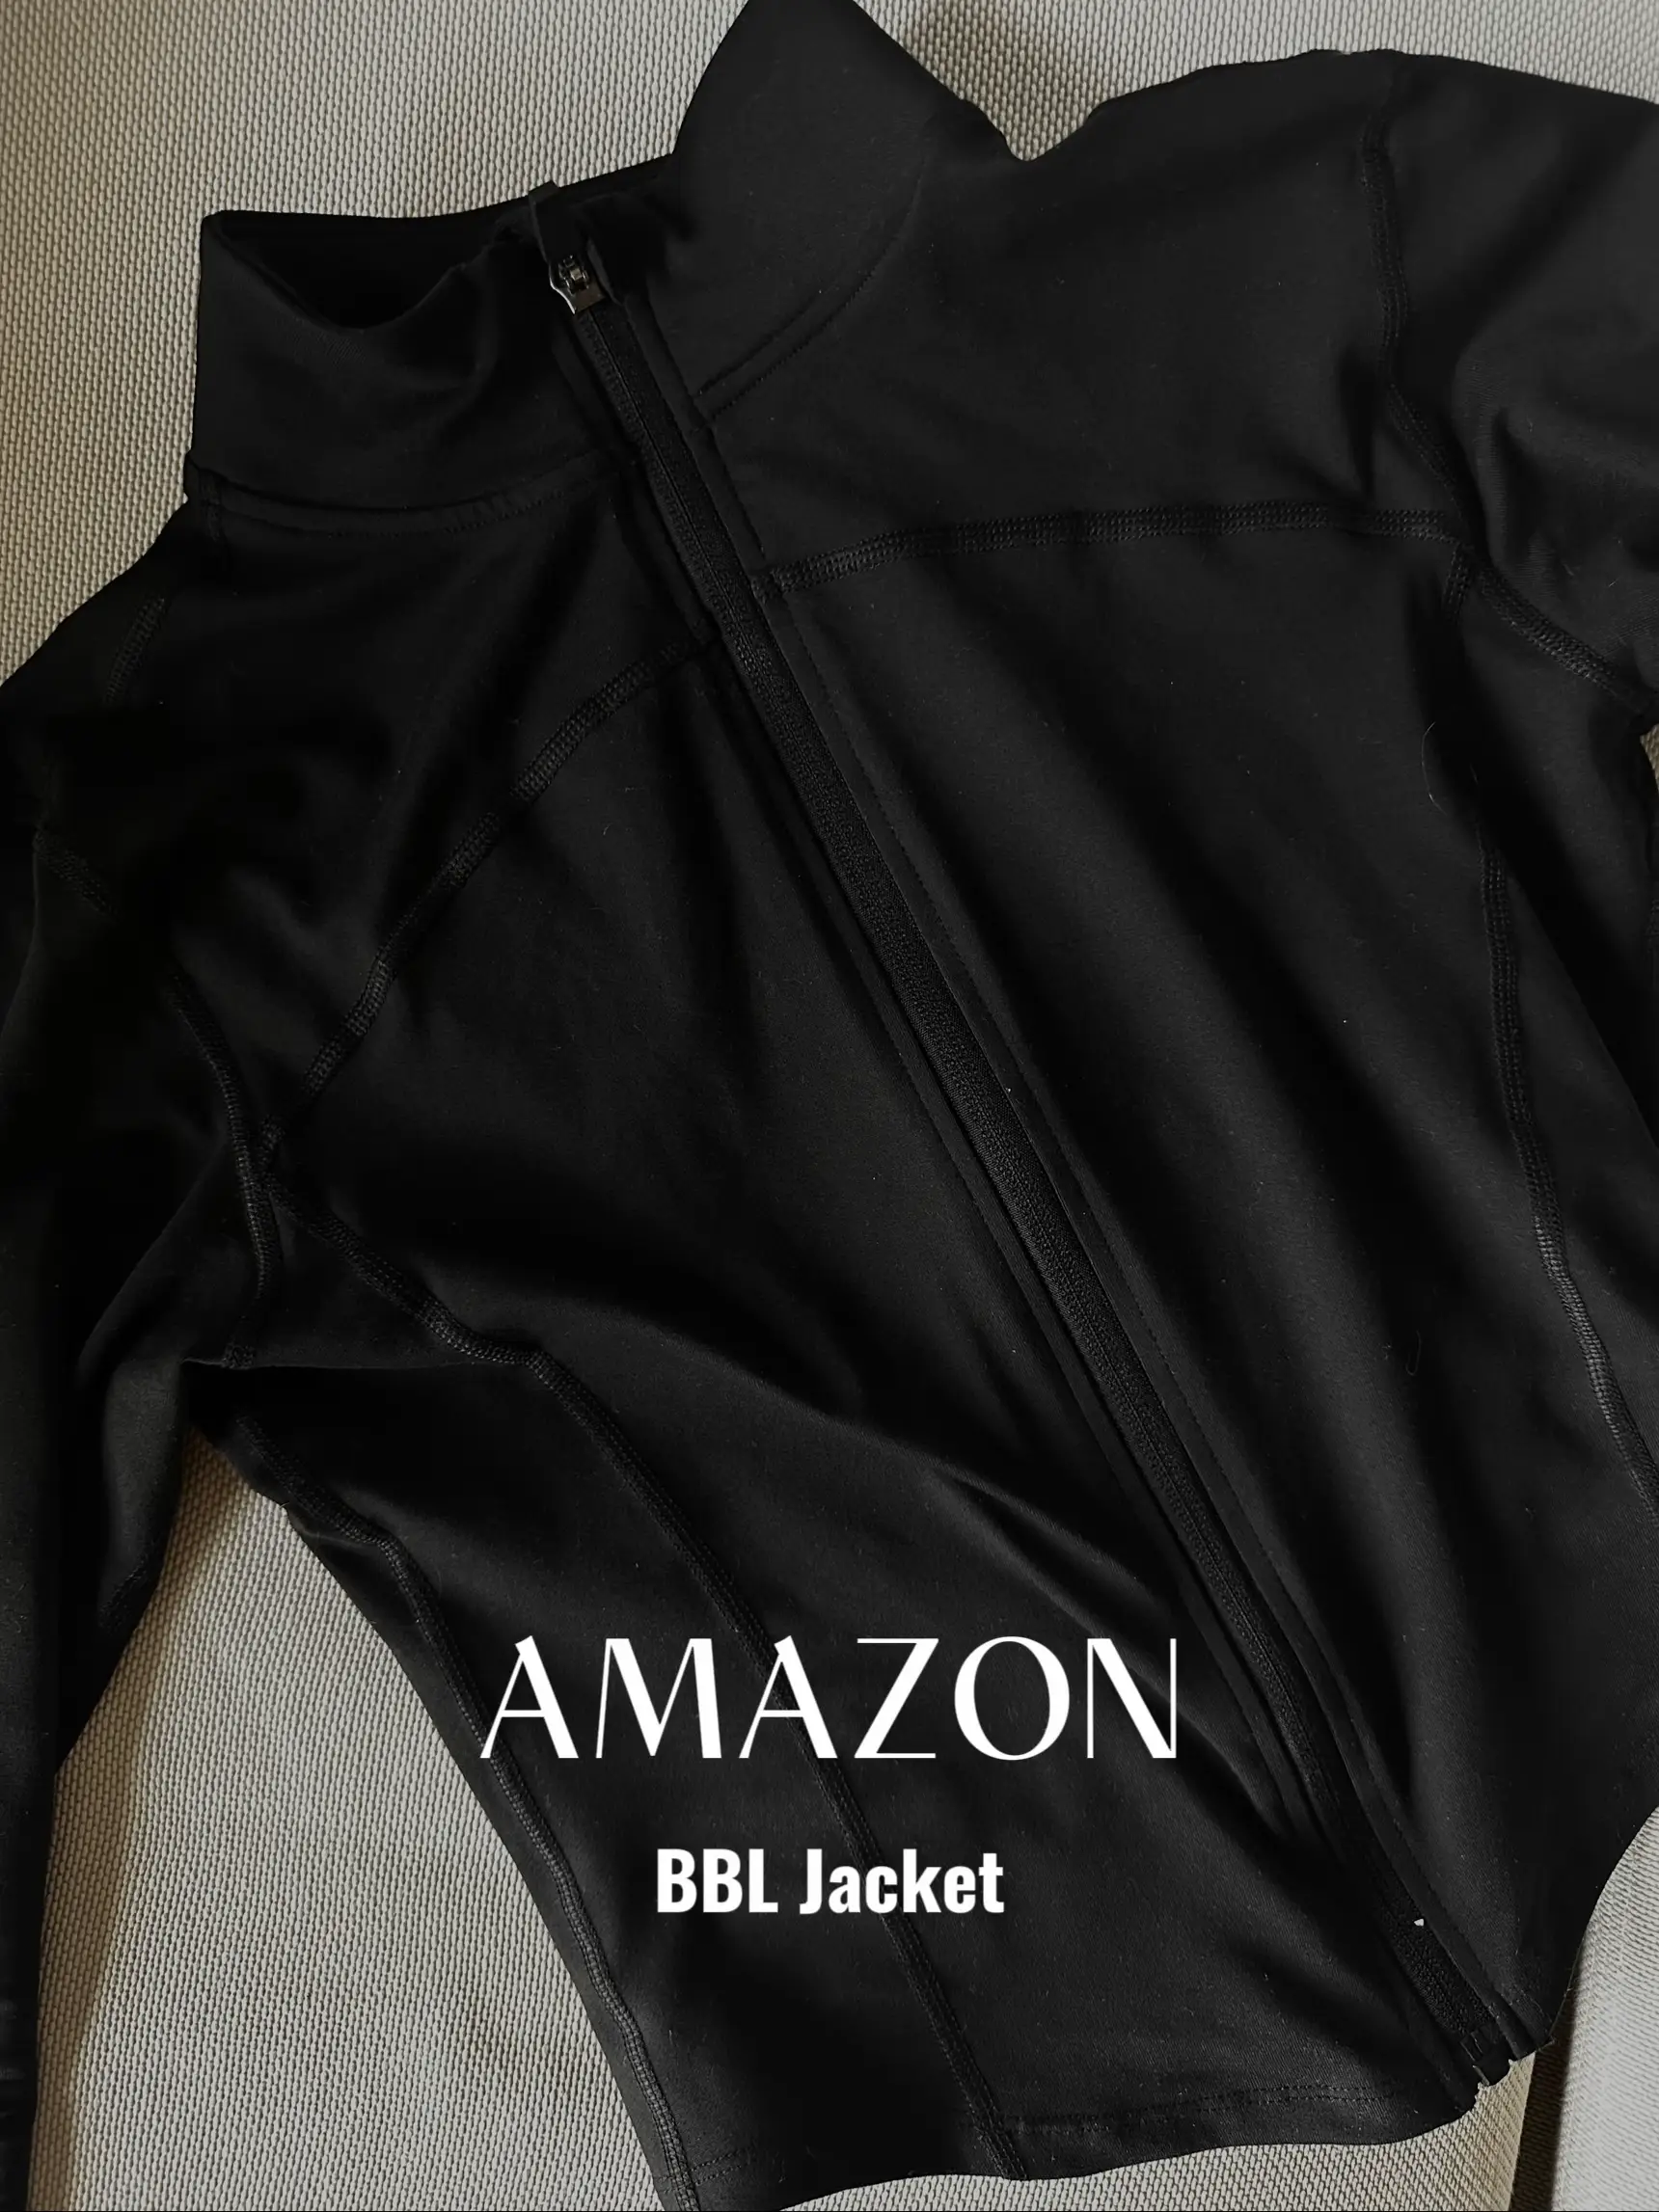 The best BBL jackets starting from just £14